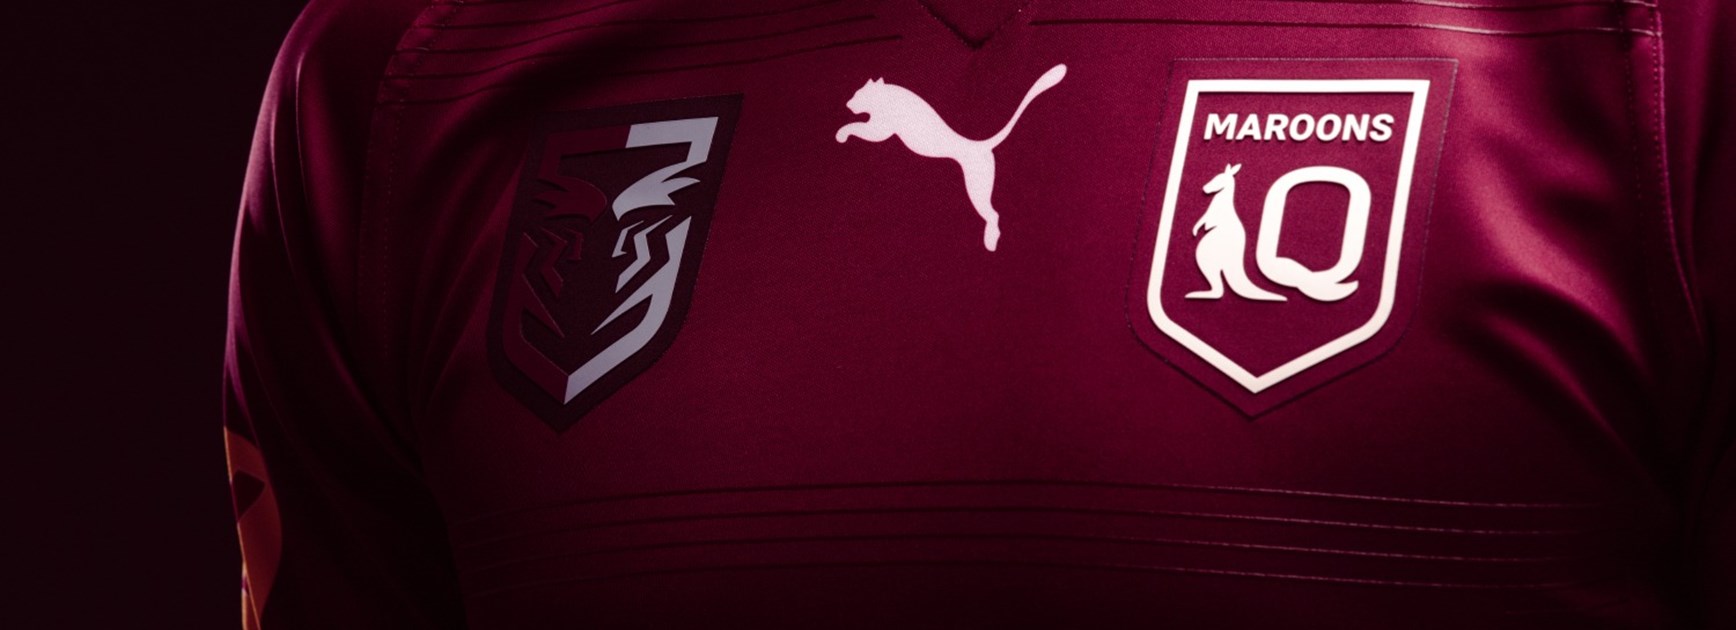 Maroons and PUMA unleash new jersey